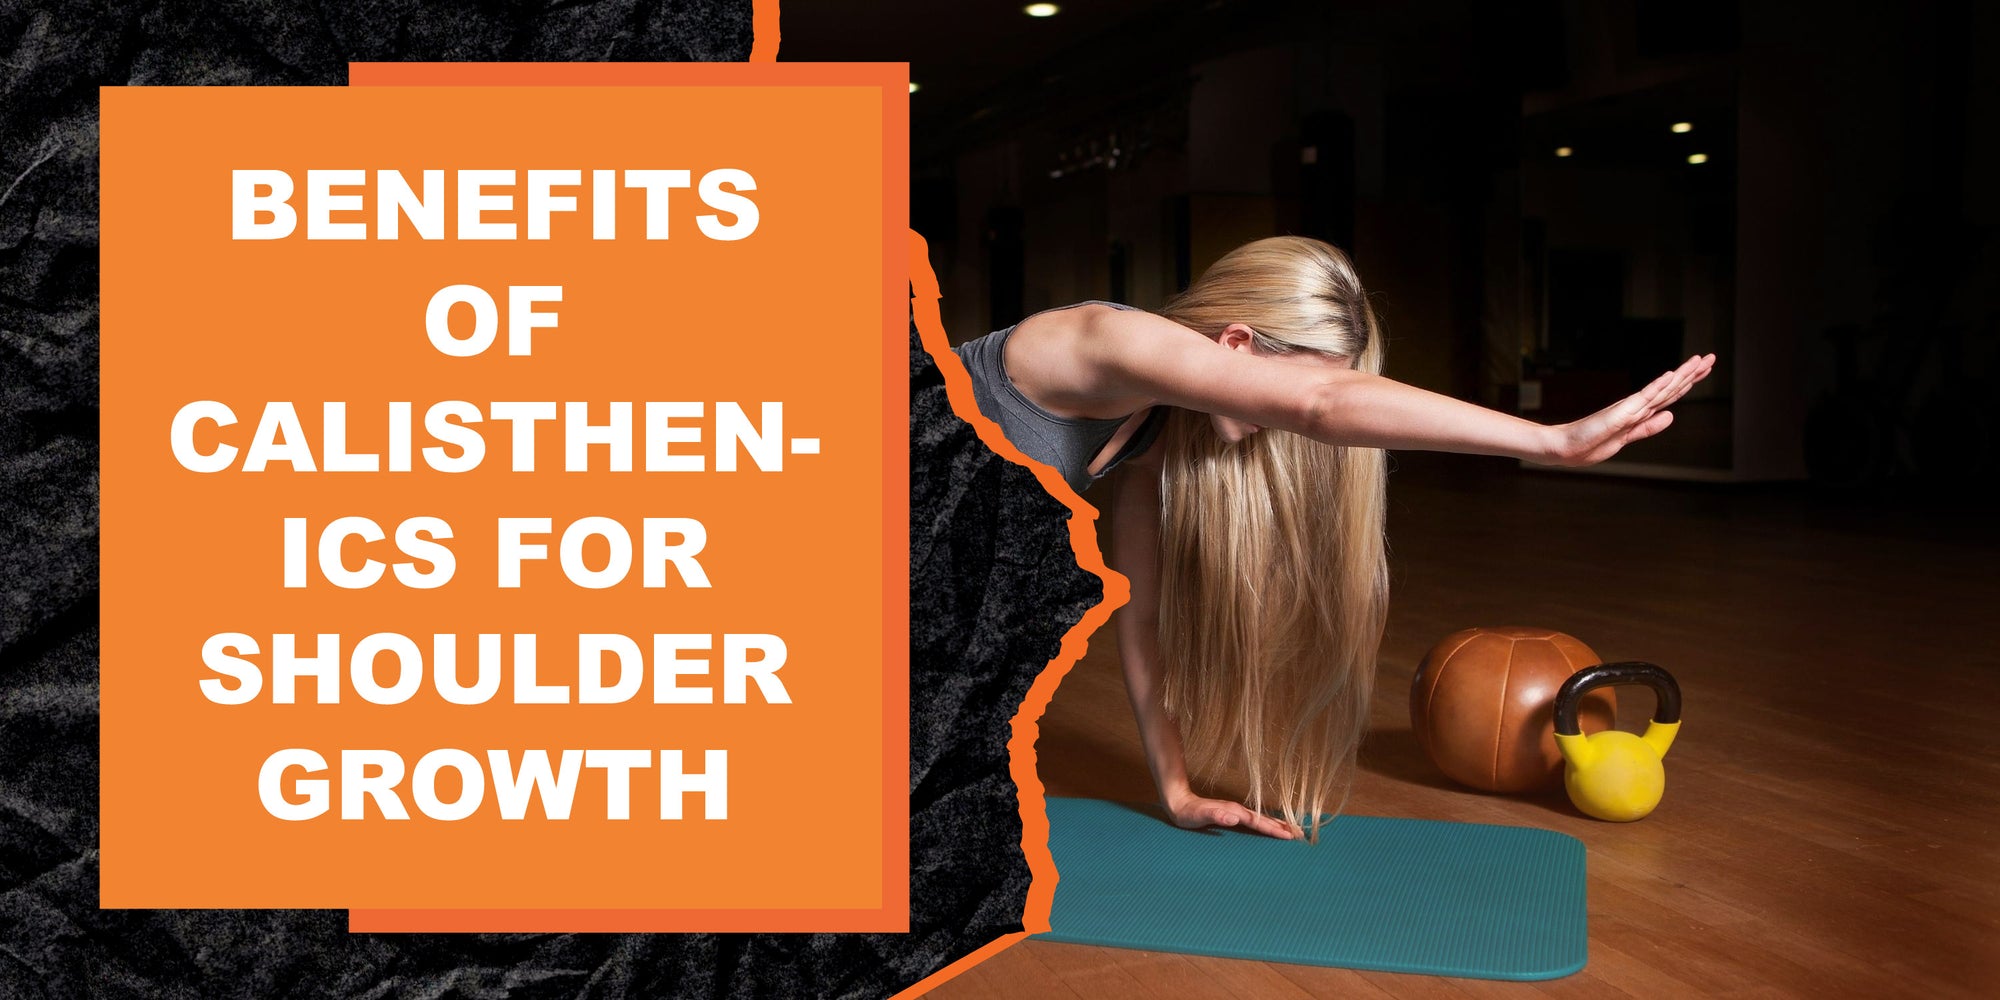 The Benefits of Calisthenics for Targeted Shoulder Growth